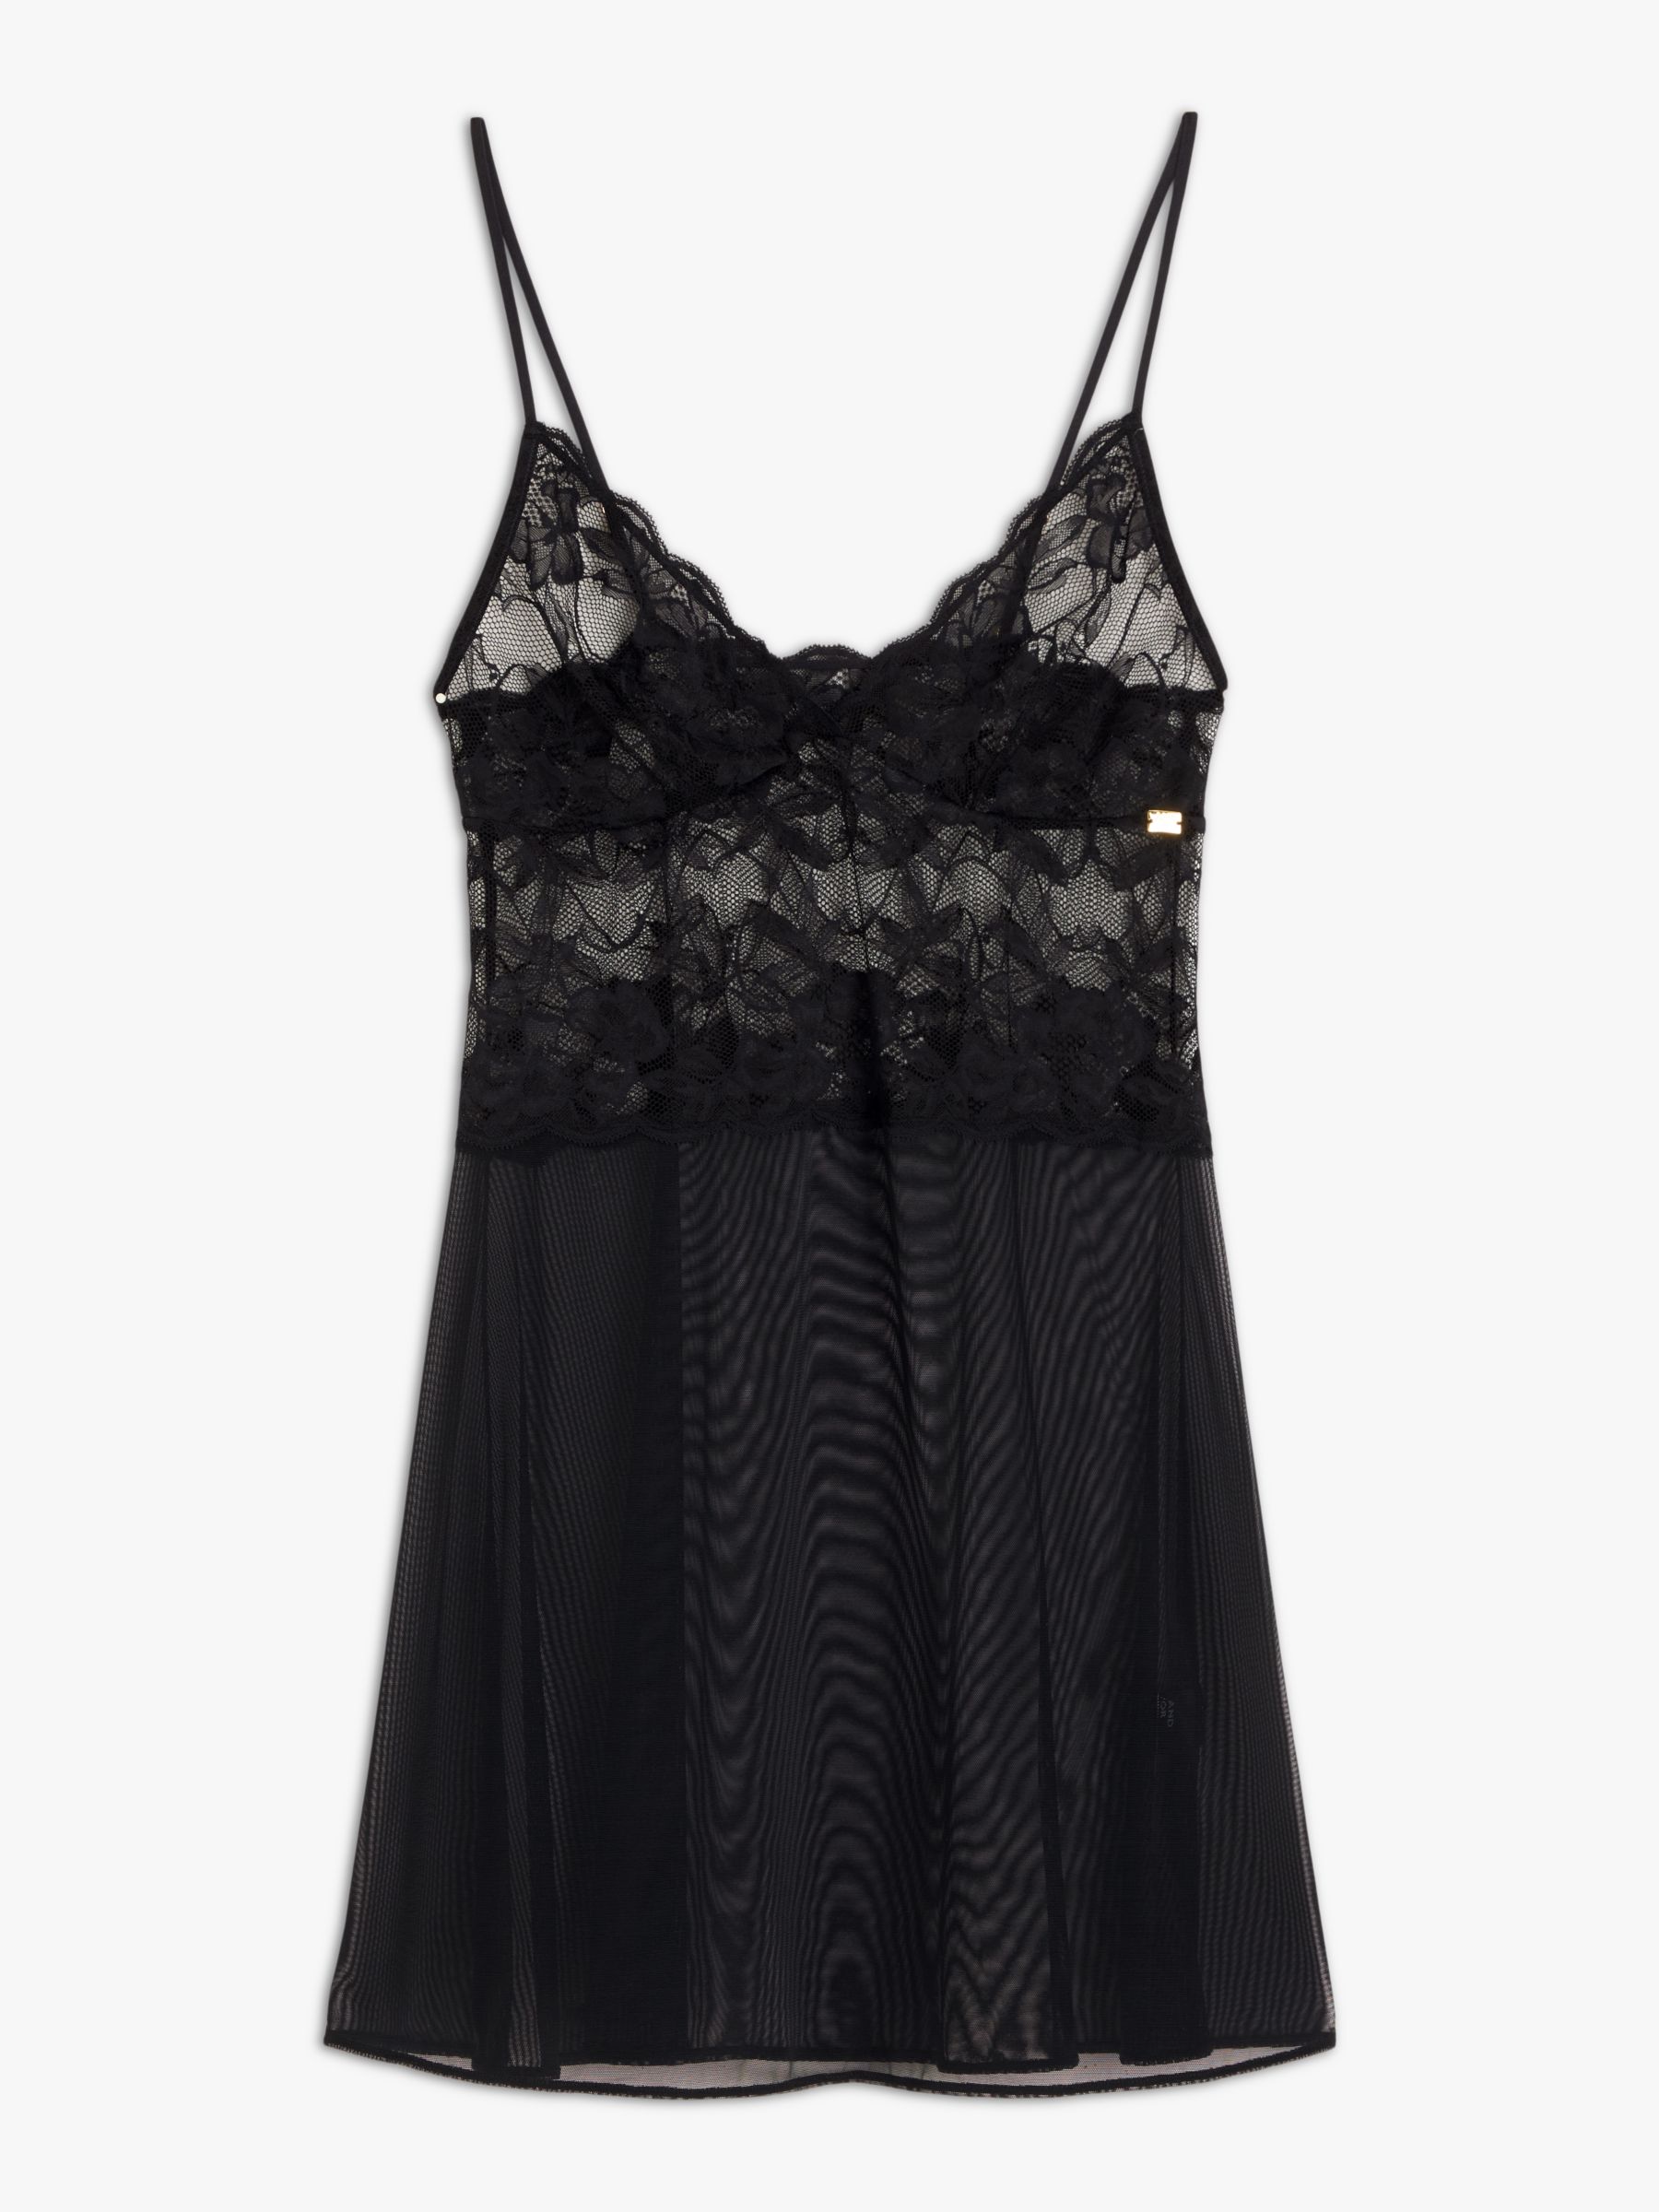 Buy AND/OR Wren Chemise Online at johnlewis.com